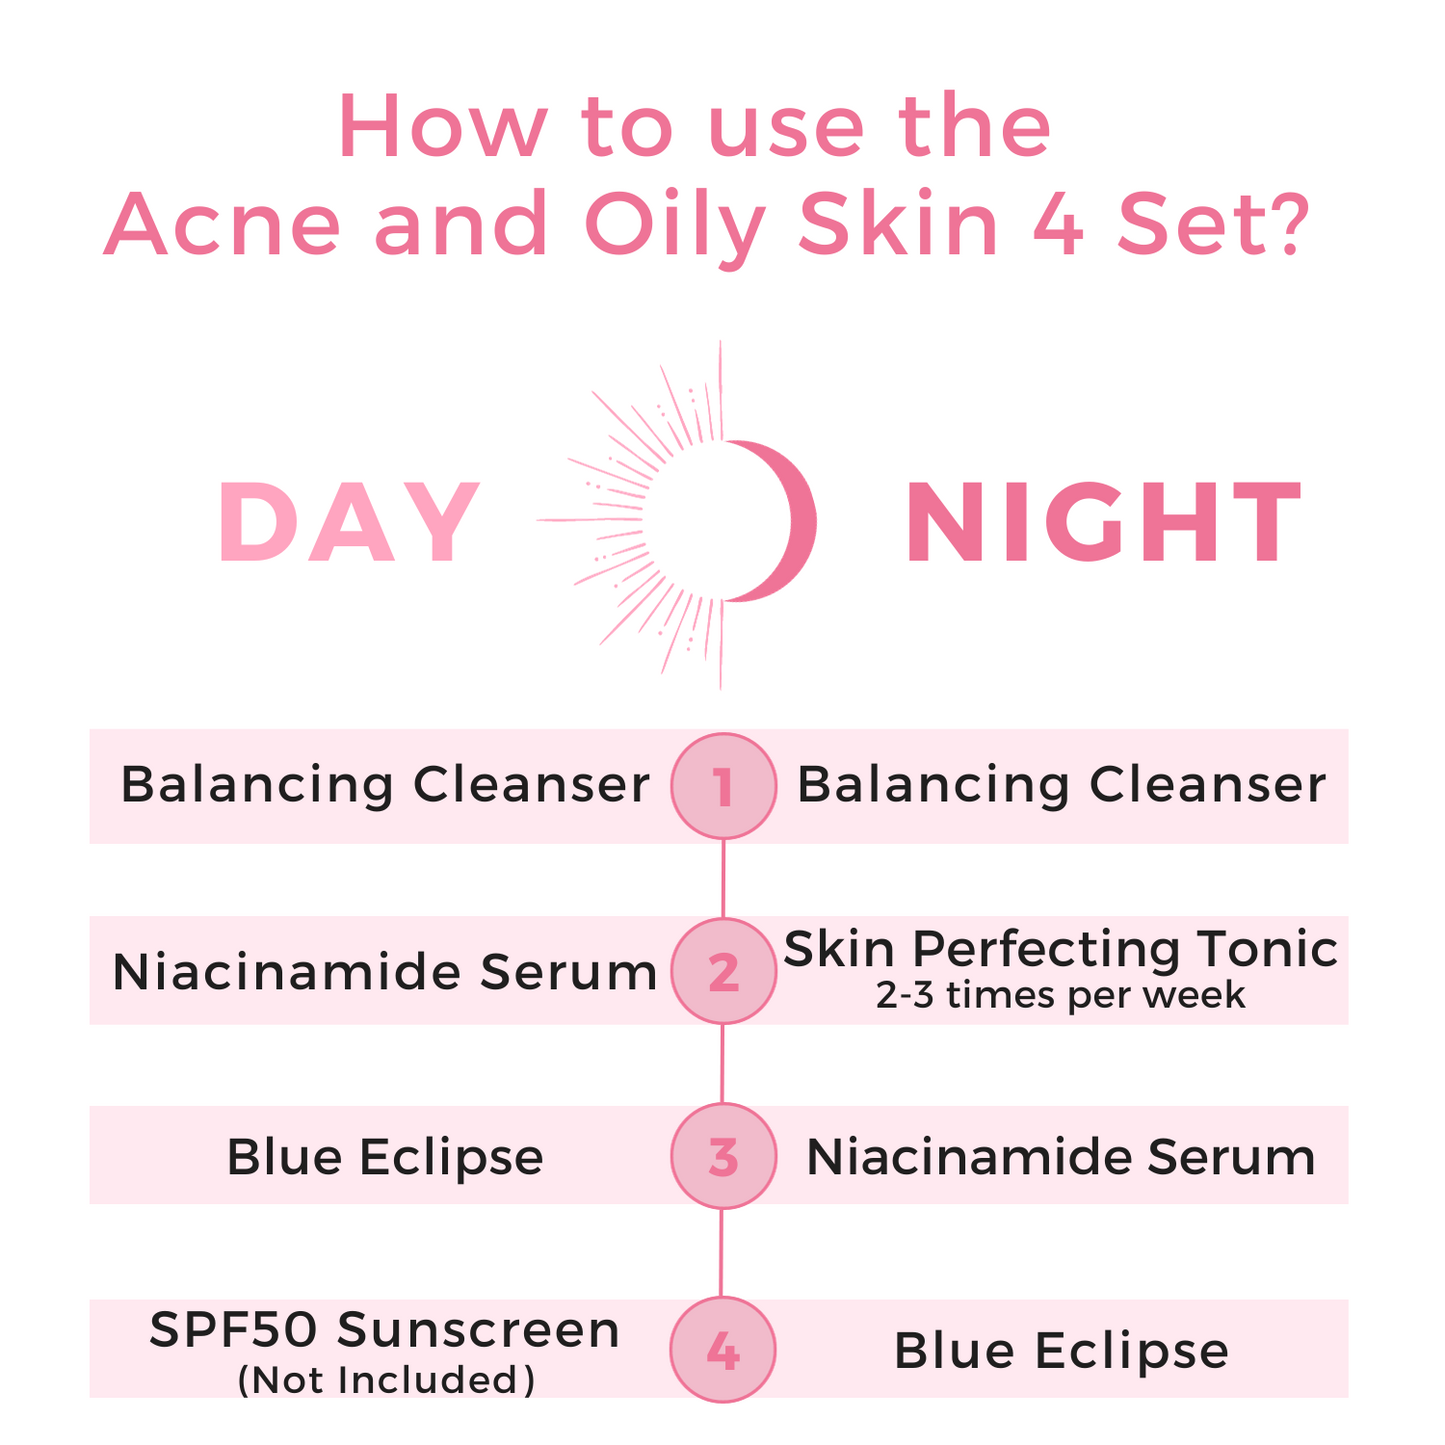 Acne and Oily Skin 4 Set